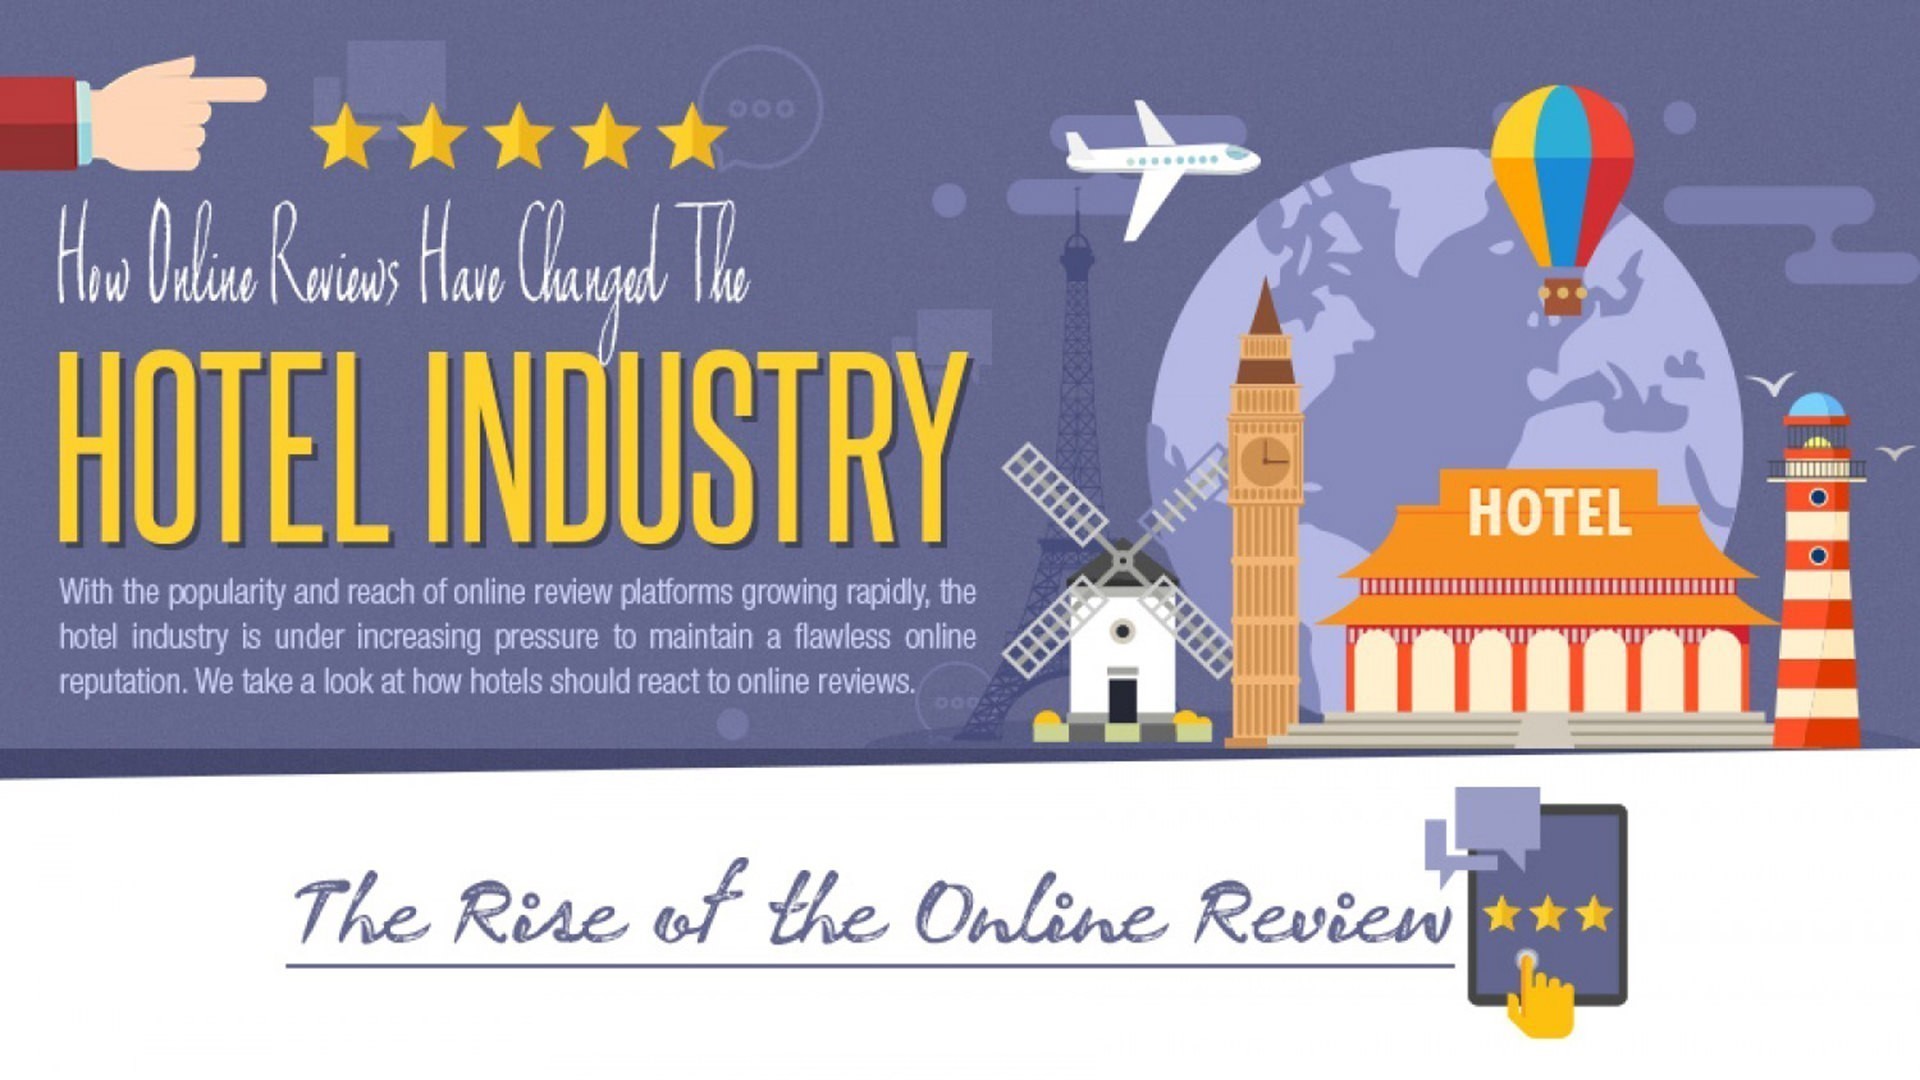 [Infographic] How hotels should respond to online reviews